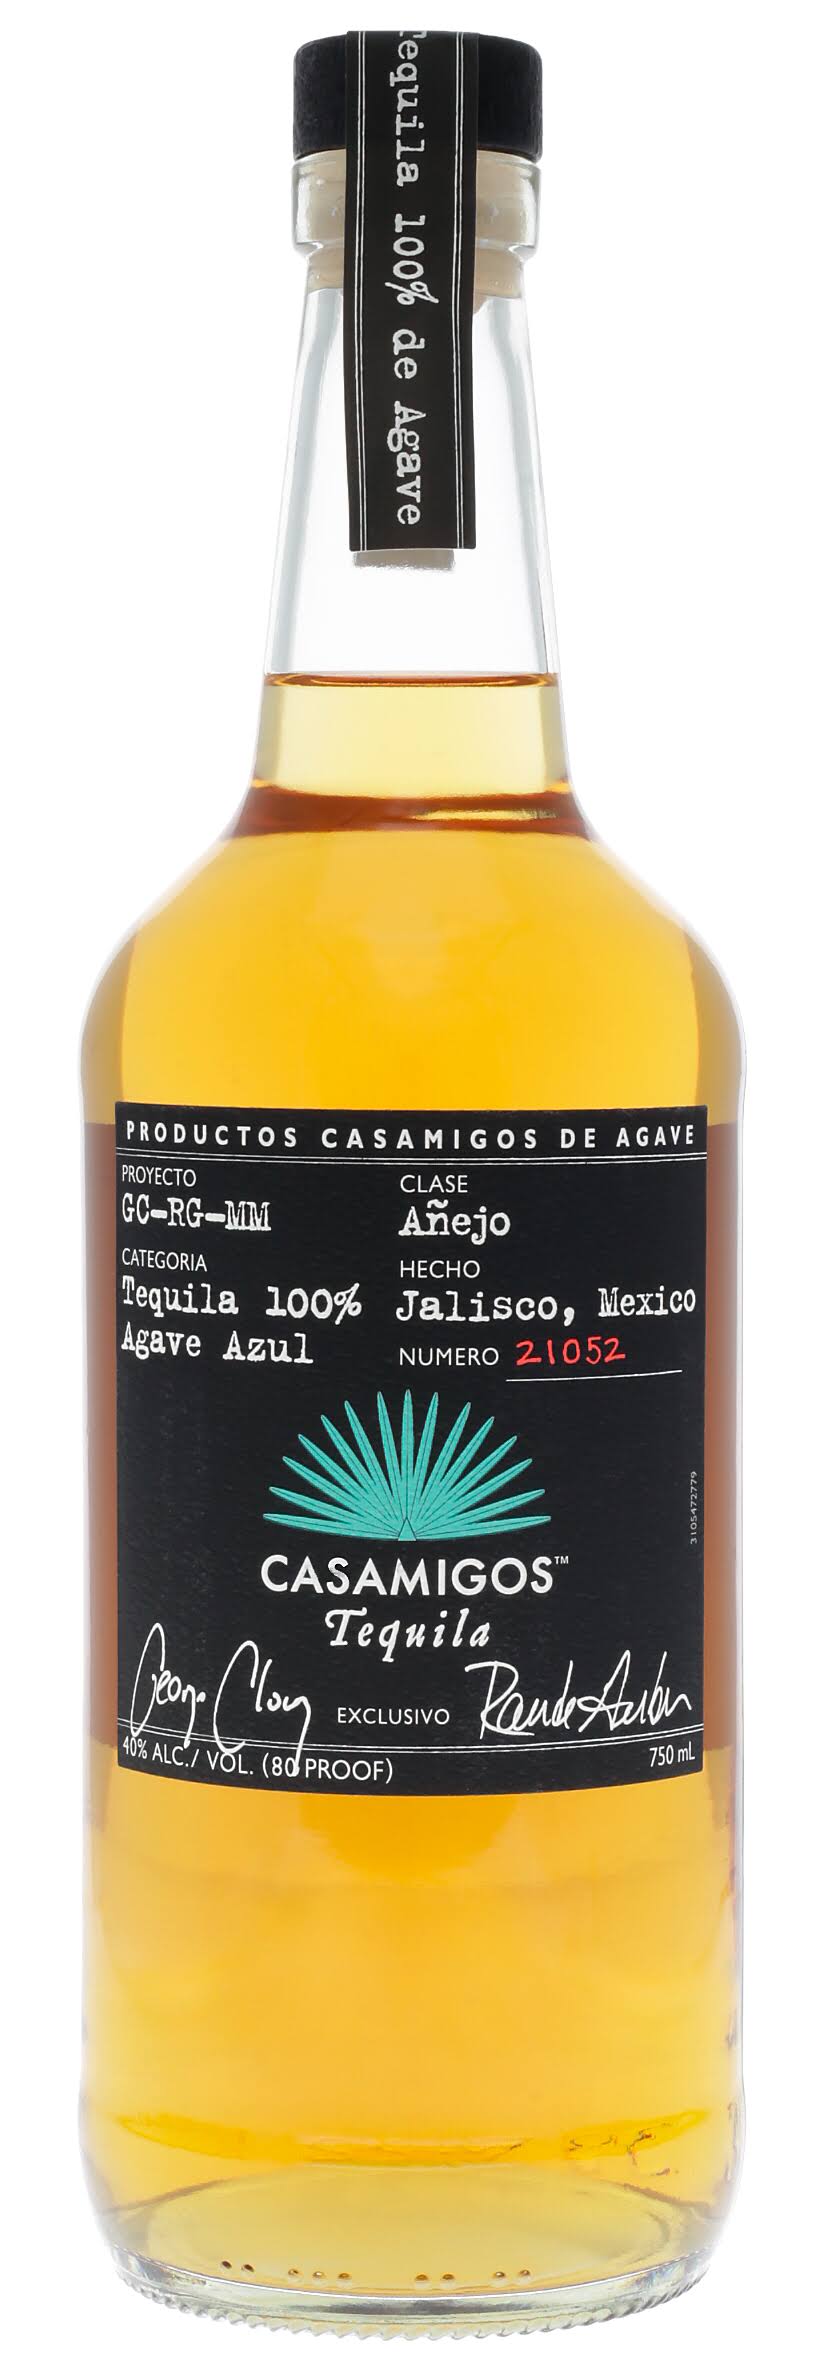 Tequila, Casamigos Anejo Tequila 700ml